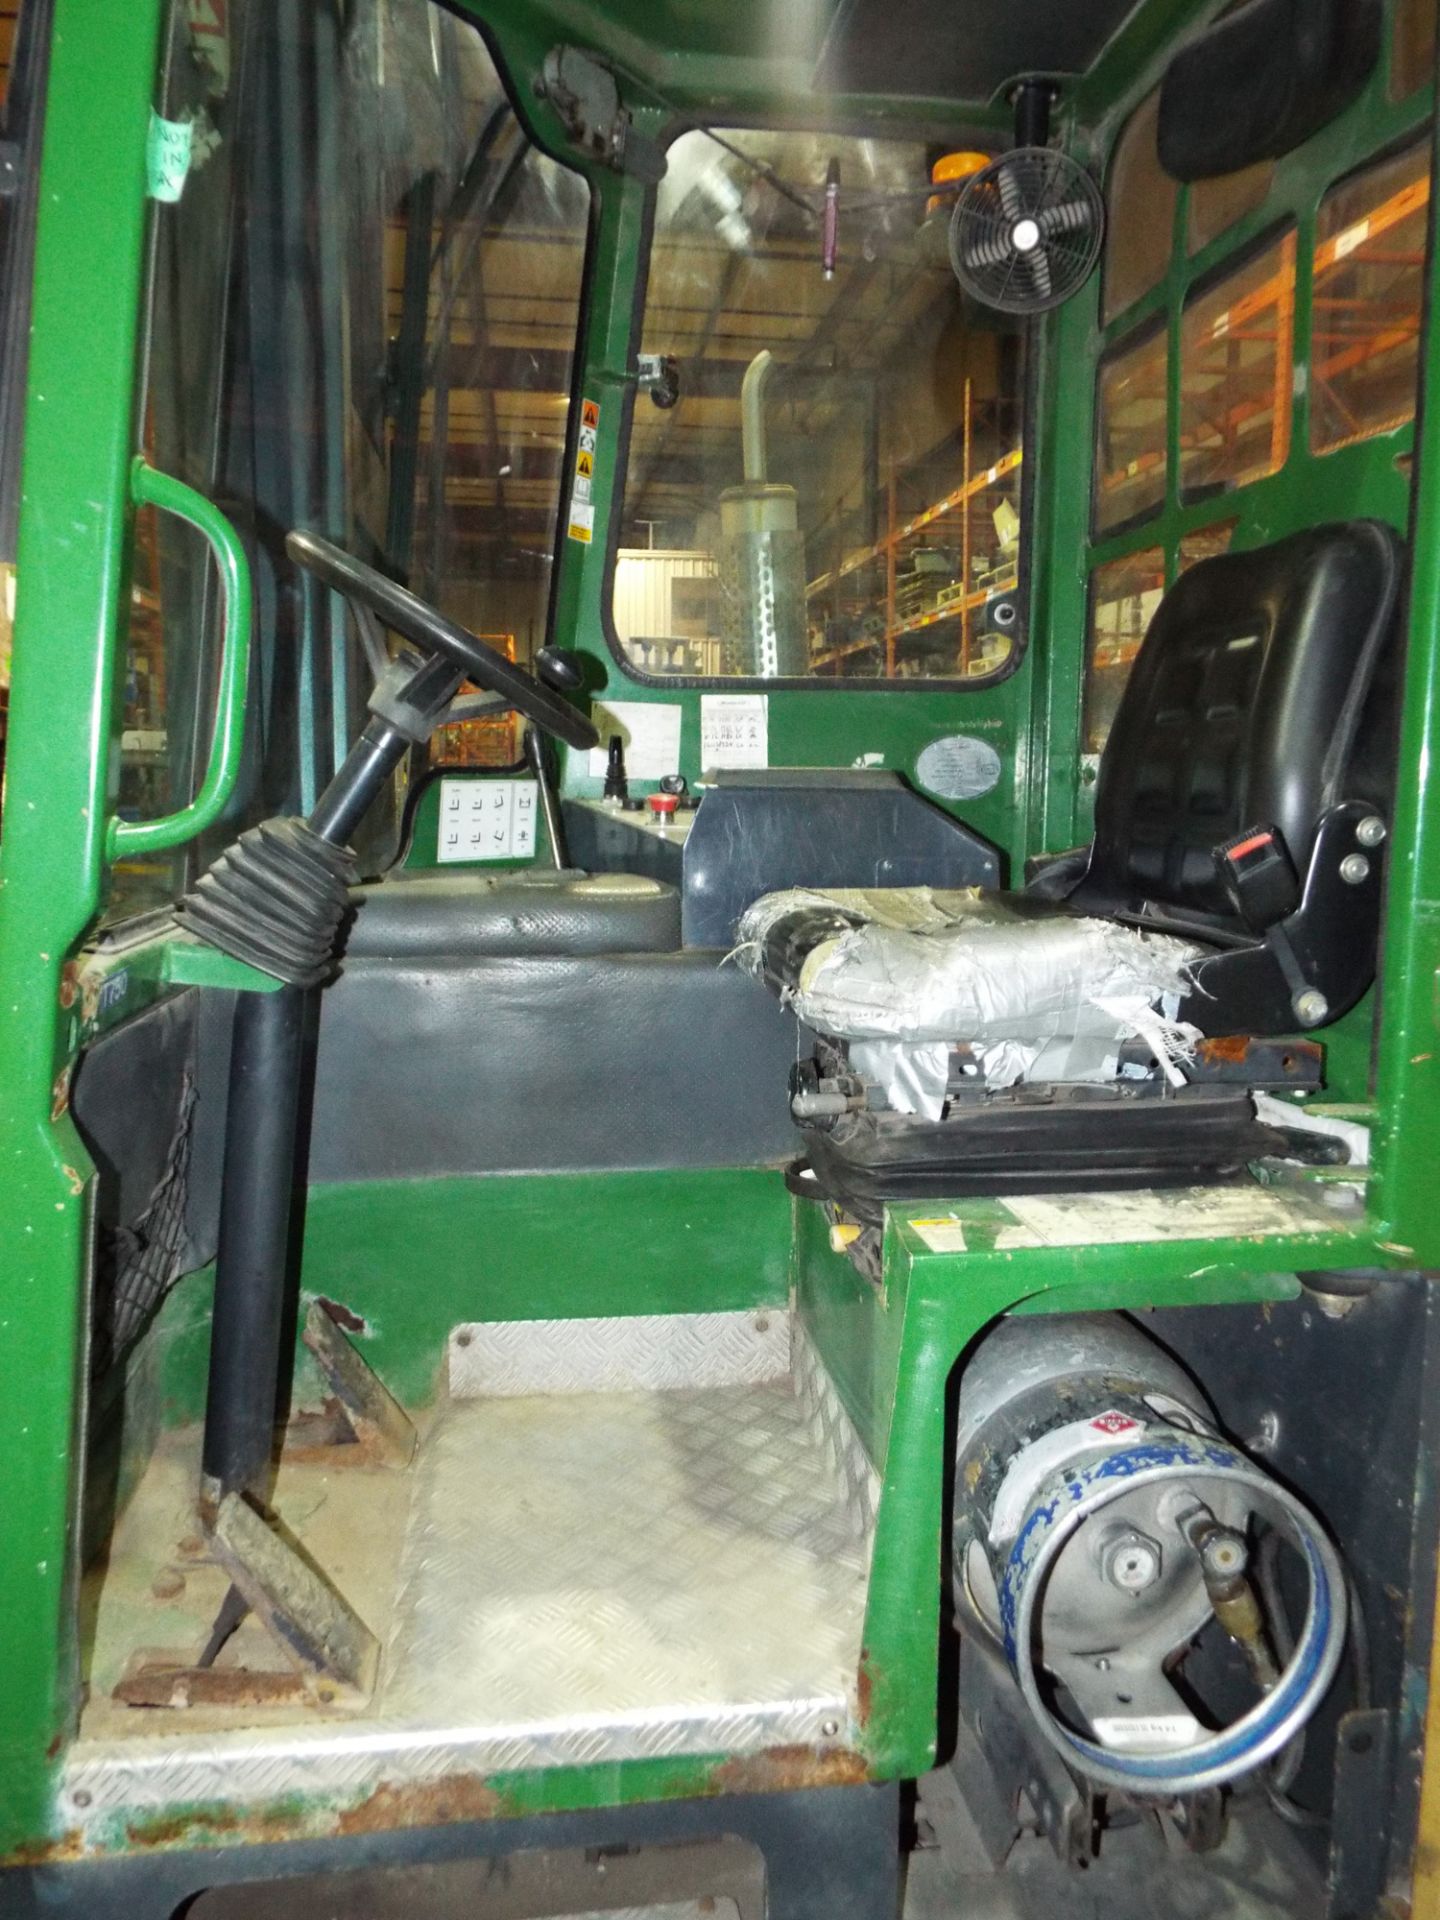 COMBI-LIFT (2006) CL22100LC48 LPG SIDE LOADER FORKLIFT WITH 10,000 LB. CAPACITY, 168" VERTICAL LIFT, - Image 6 of 9